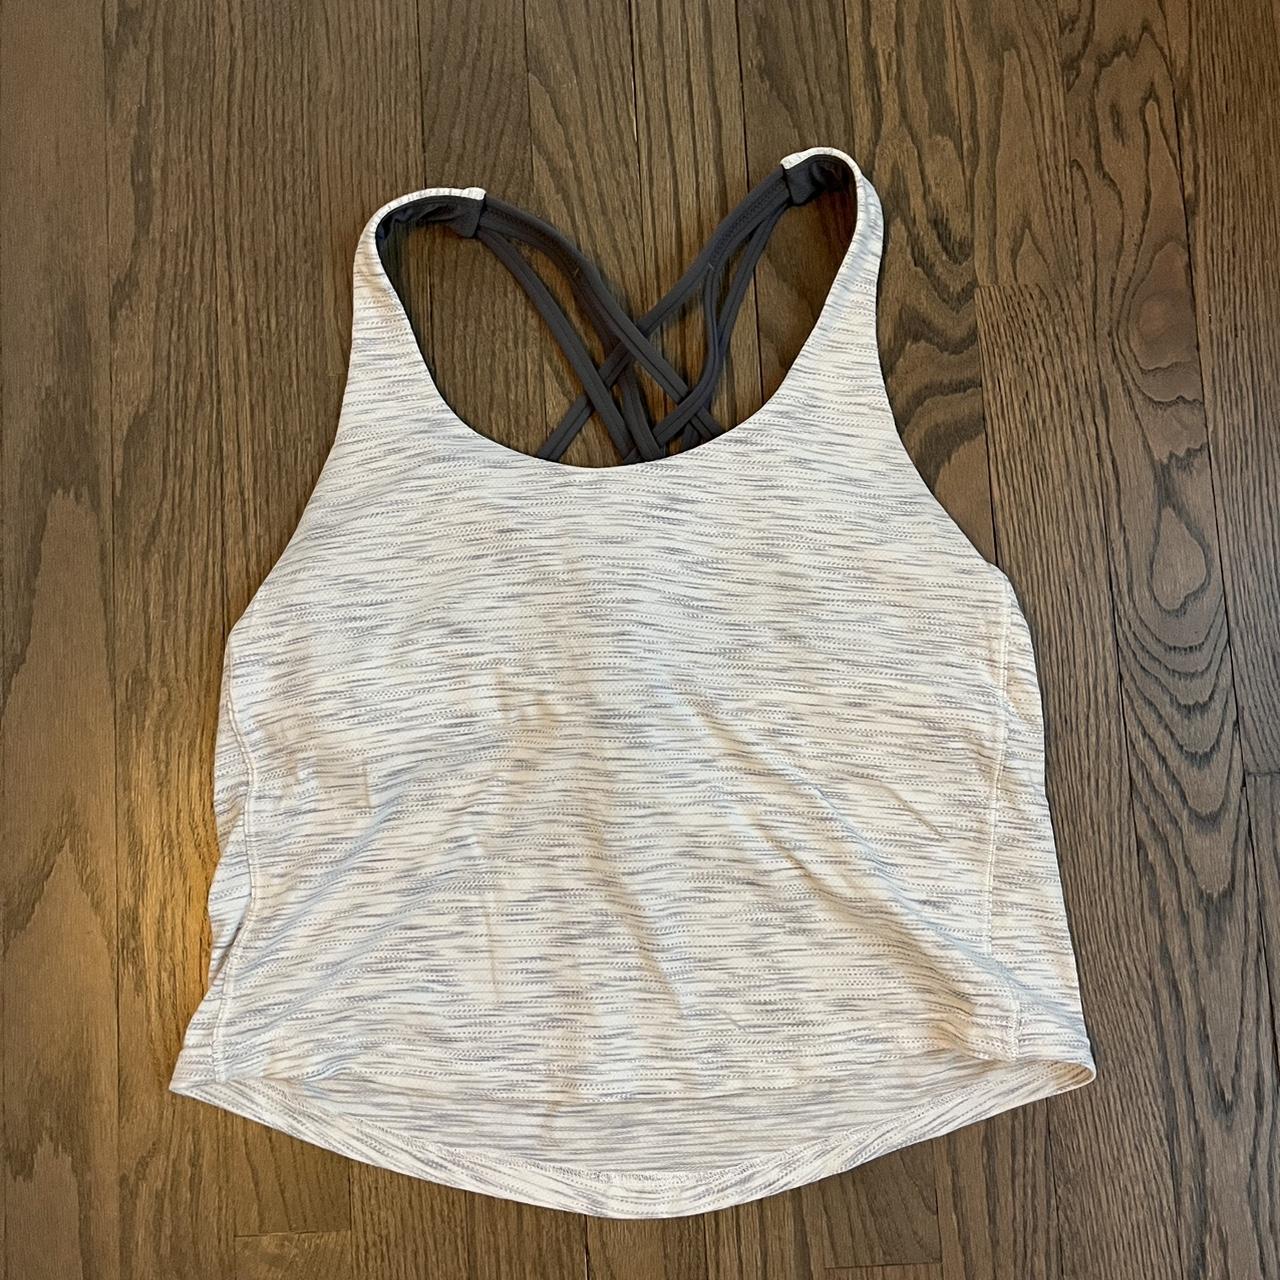 Lululemon tank top with built in bra. Size 8.